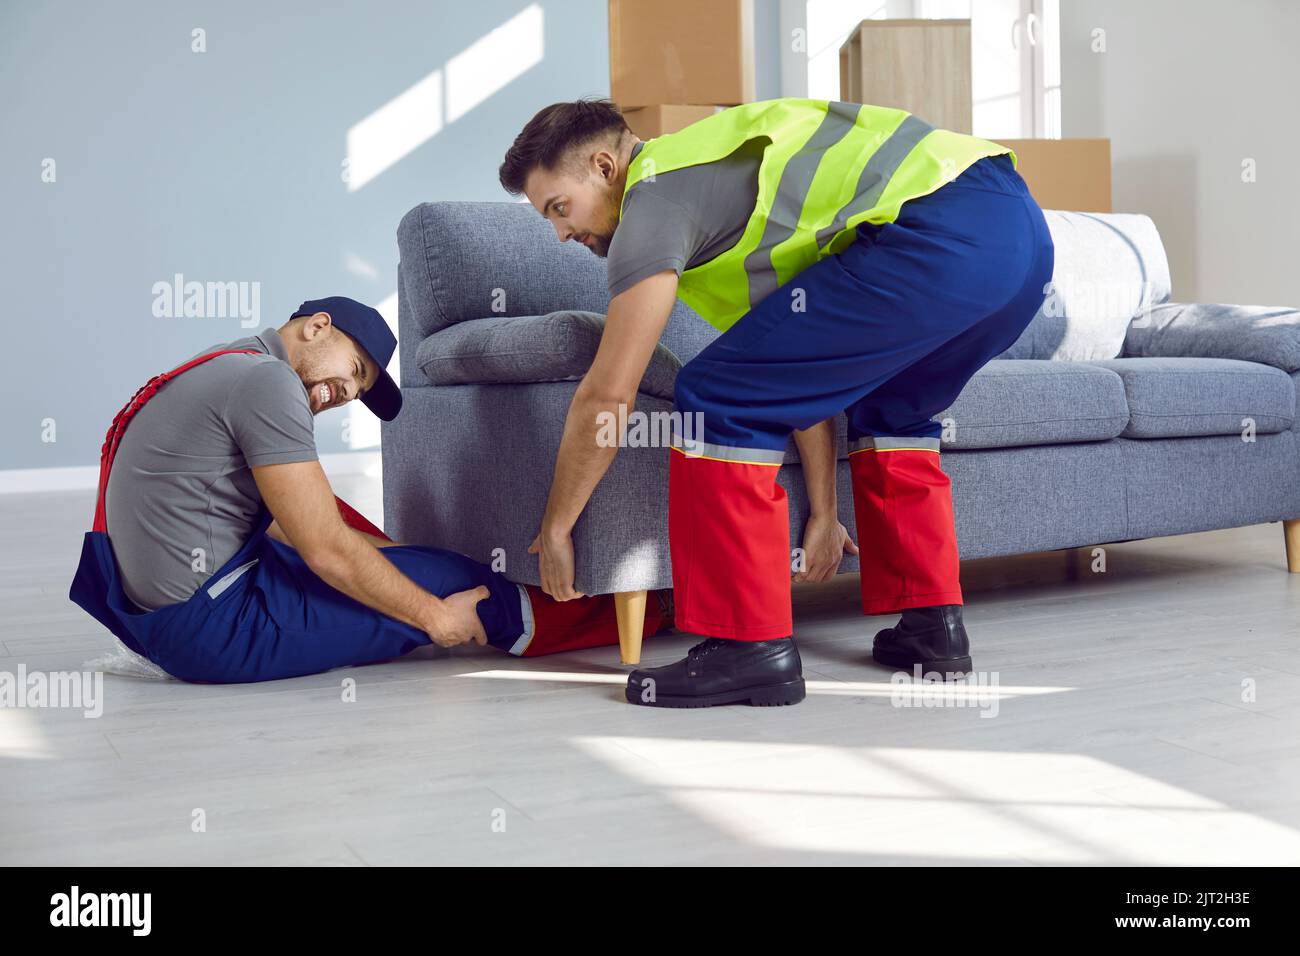 https://c8.alamy.com/comp/2JT2H3E/one-of-the-loaders-gets-his-leg-broken-while-removing-heavy-couches-from-the-house-2JT2H3E.jpg